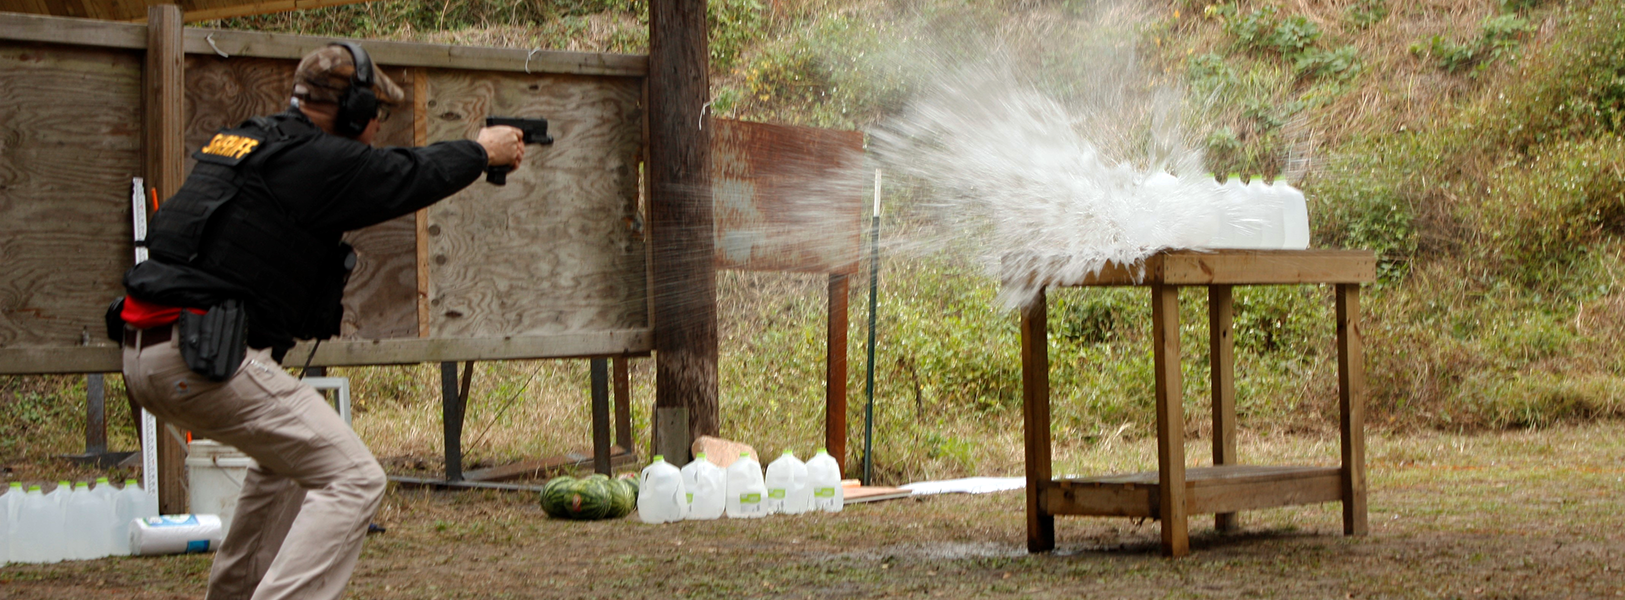 Class exercise shooting gallon bottles of water